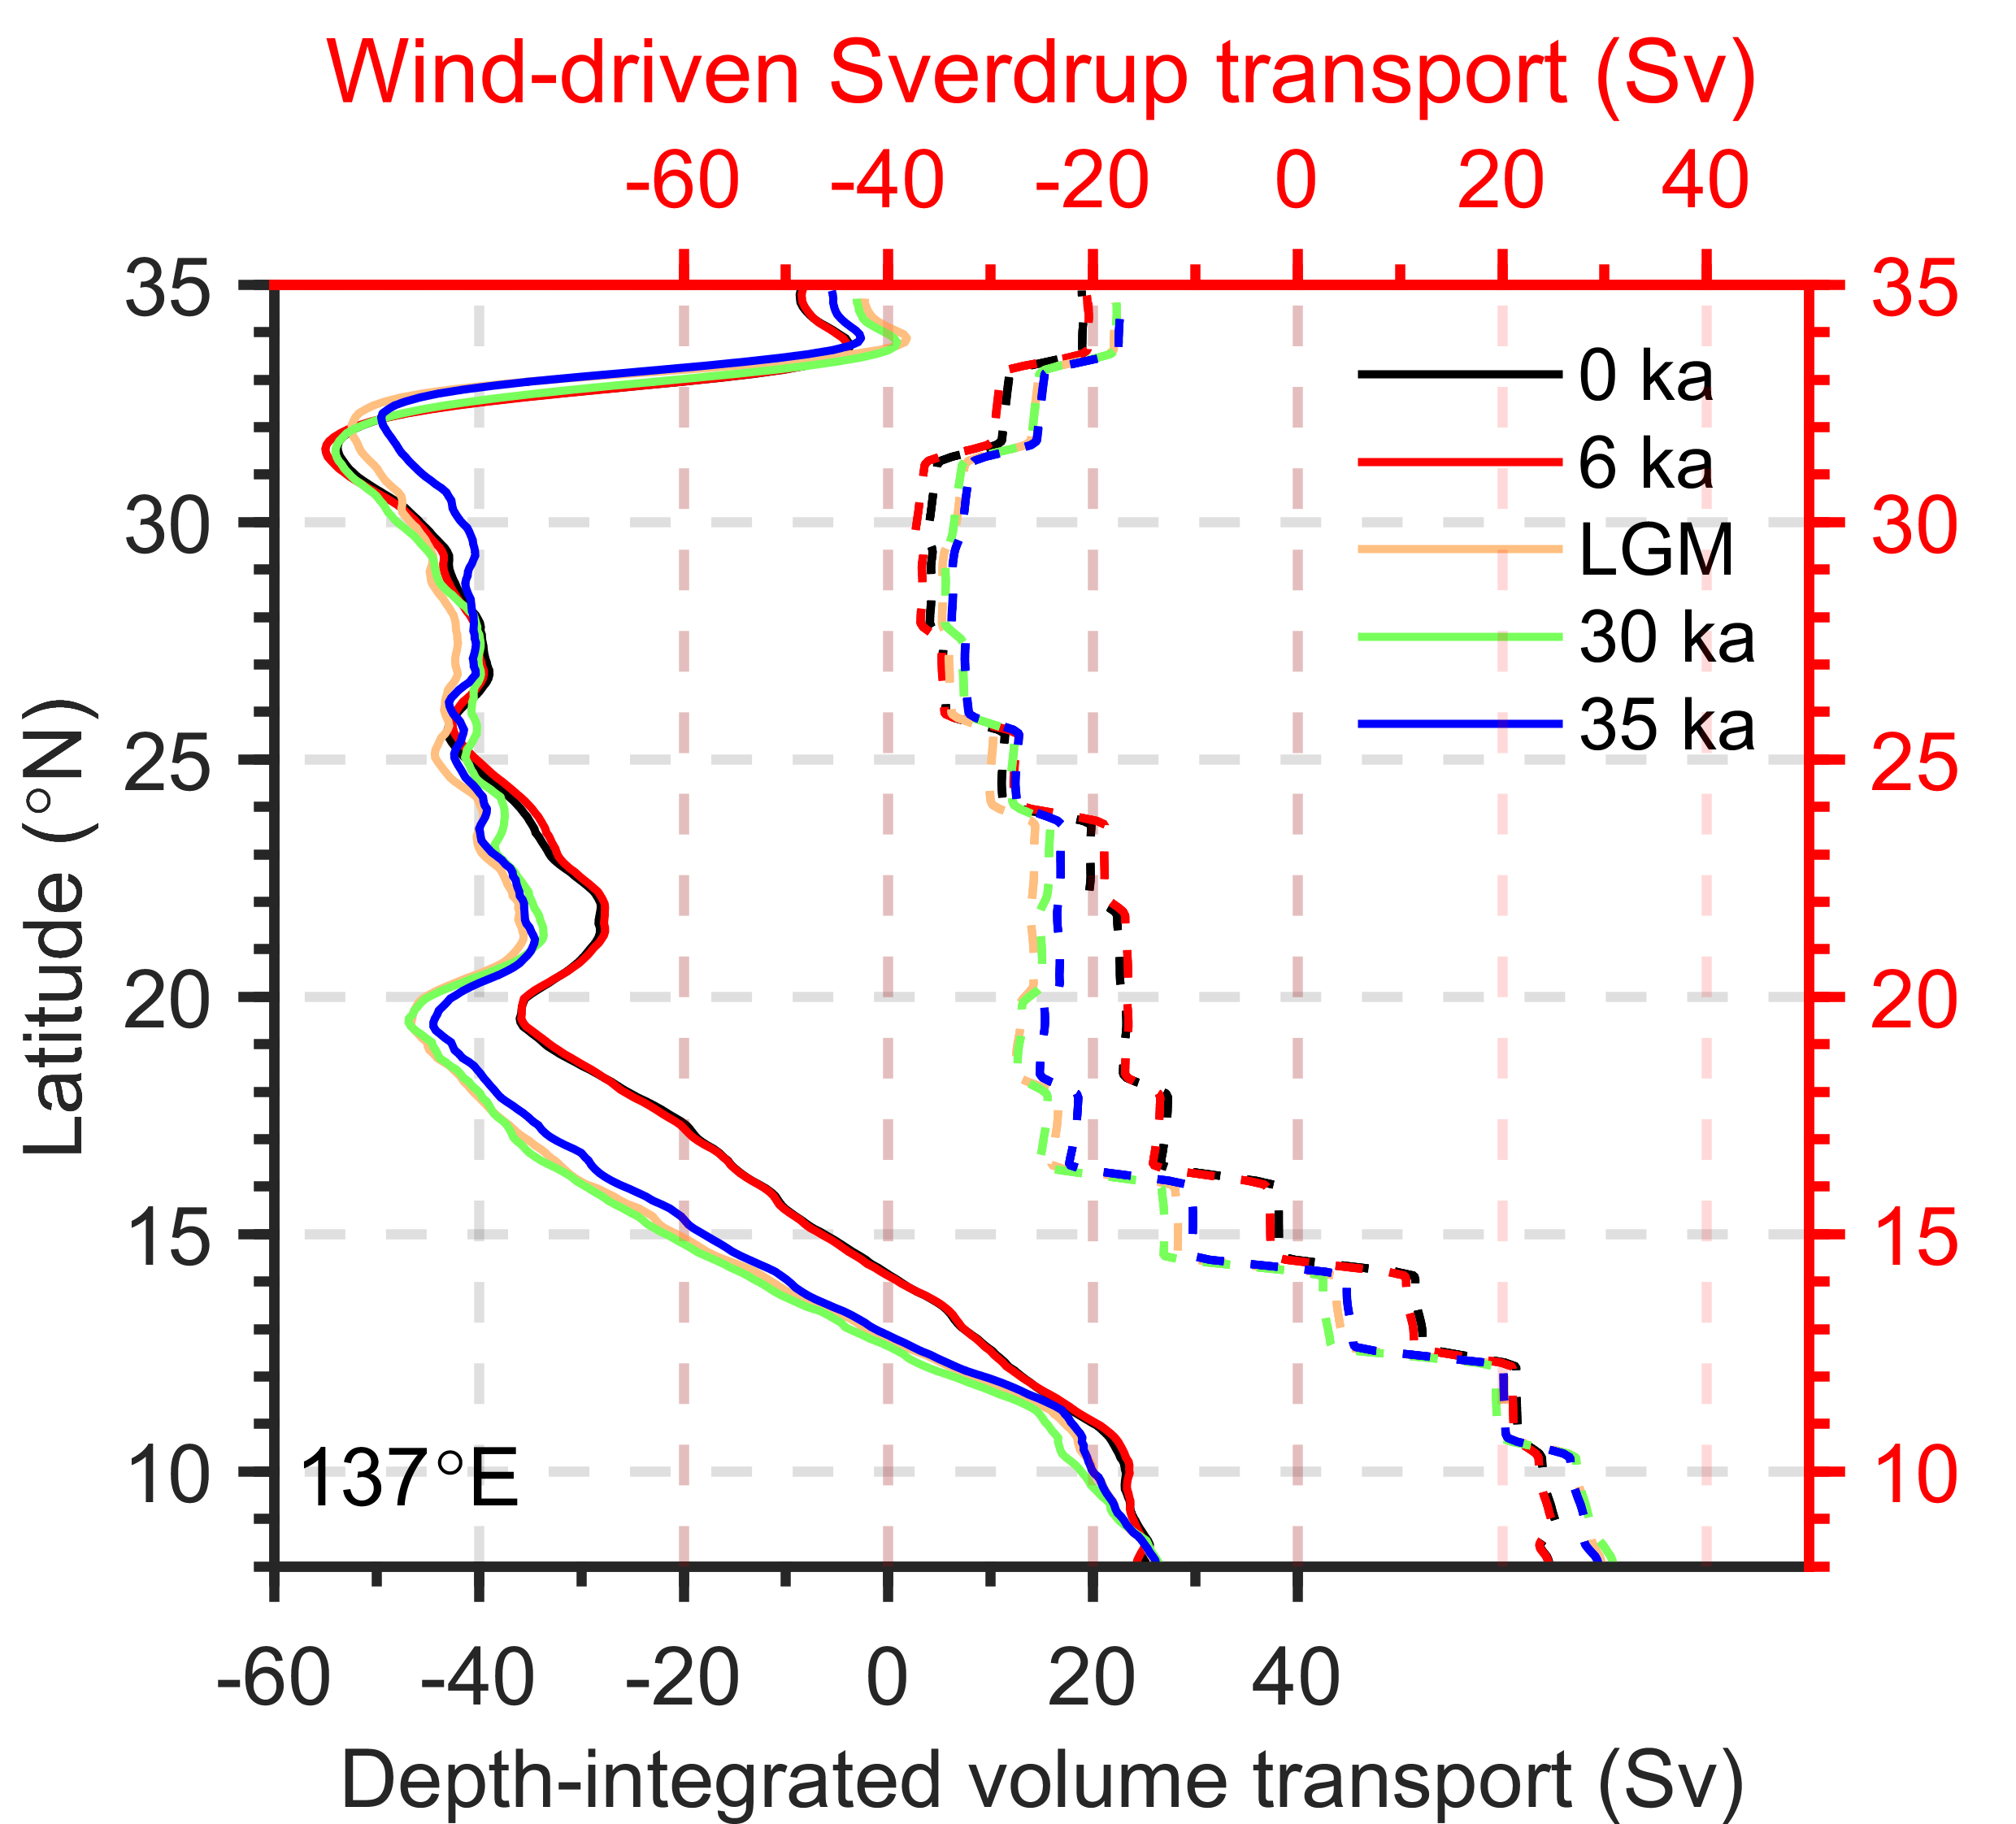 Depth-integrated volume transport and wind-driven Sverdrup transport from the east coast to 137 °E